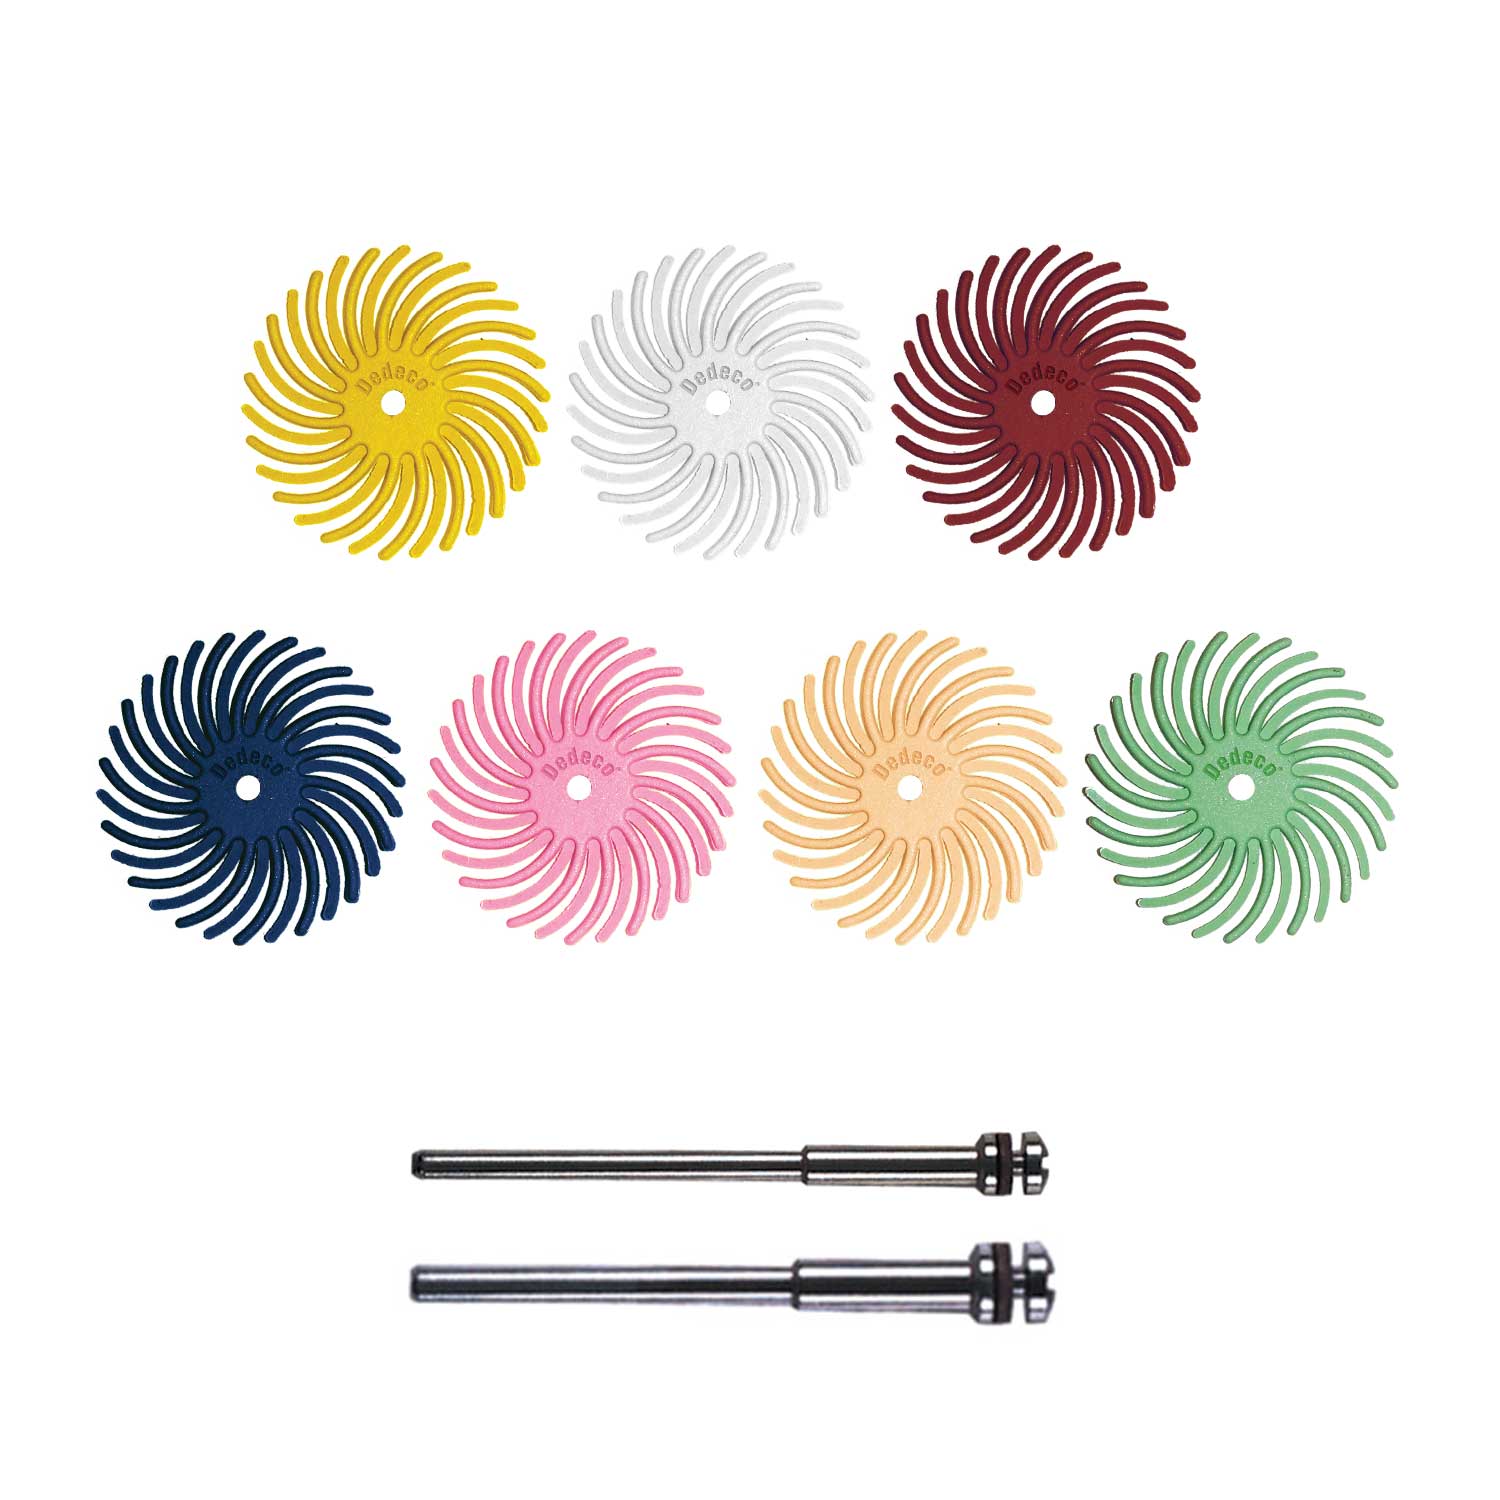 Dedeco Sunburst 3 Inch E-Z Loc Brushes Medium 120 Grit 10 Pack Industrial Thermoplastic Rotary Cleaning and Deburring Tool 